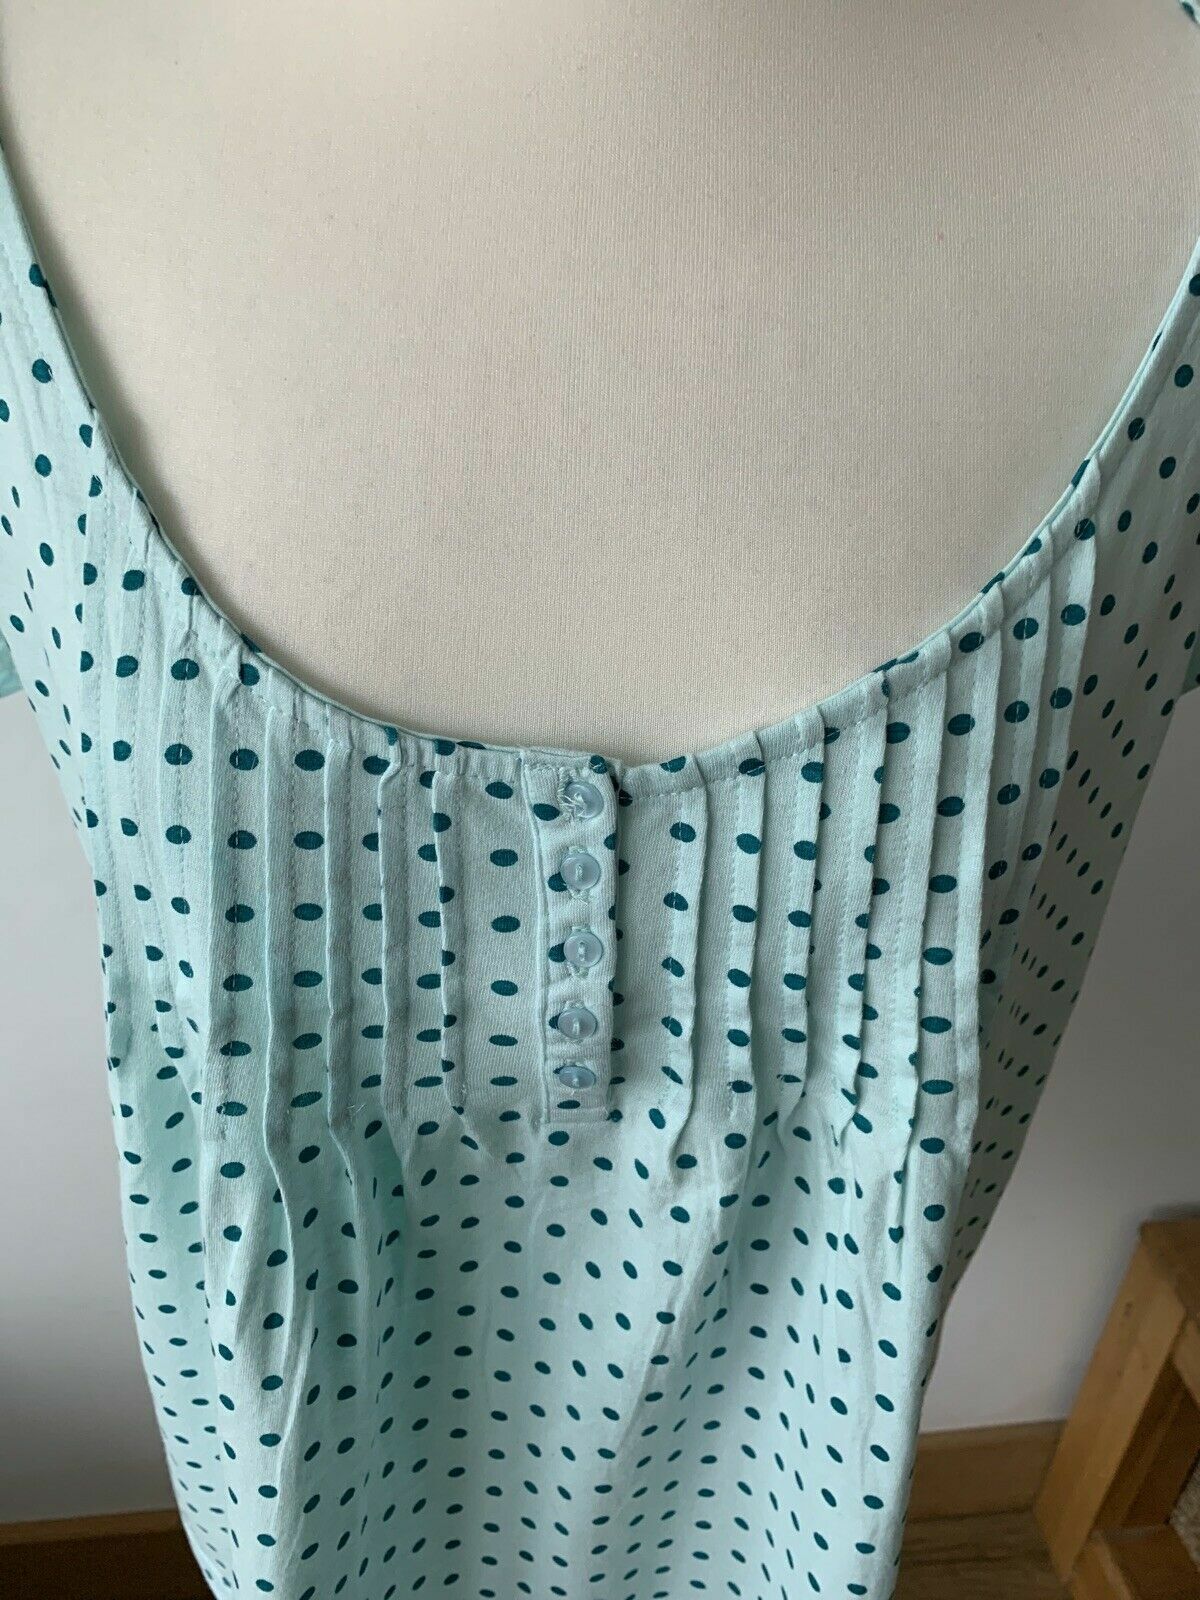 Blancheporte Light Teal Polka Dot Top Cotton Size 16 - 18 Pit to Pit 19.5"